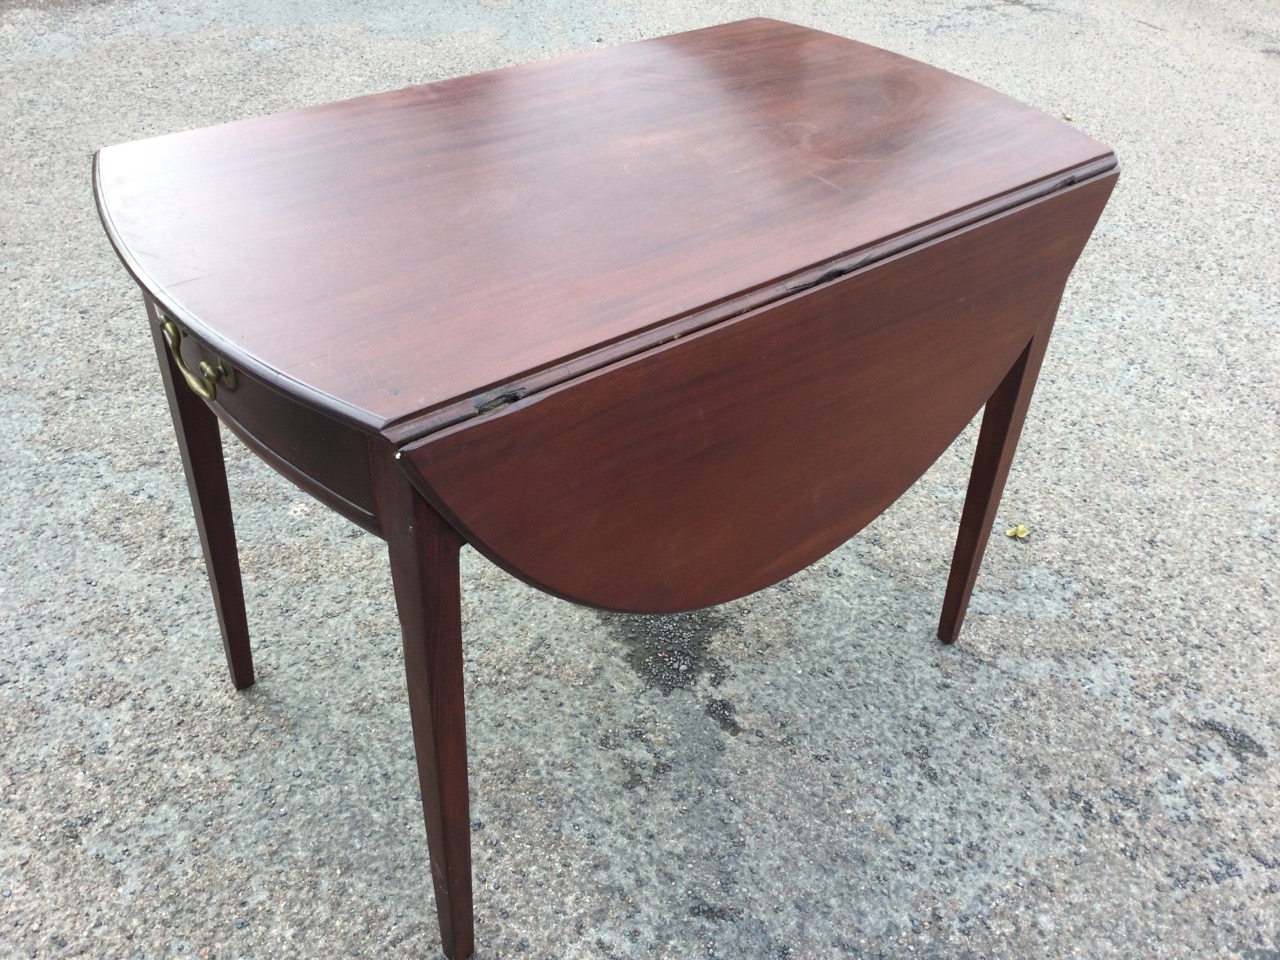 A nineteenth century oval mahogany pembroke table with two rule-jointed drop leaves, the - Image 3 of 3